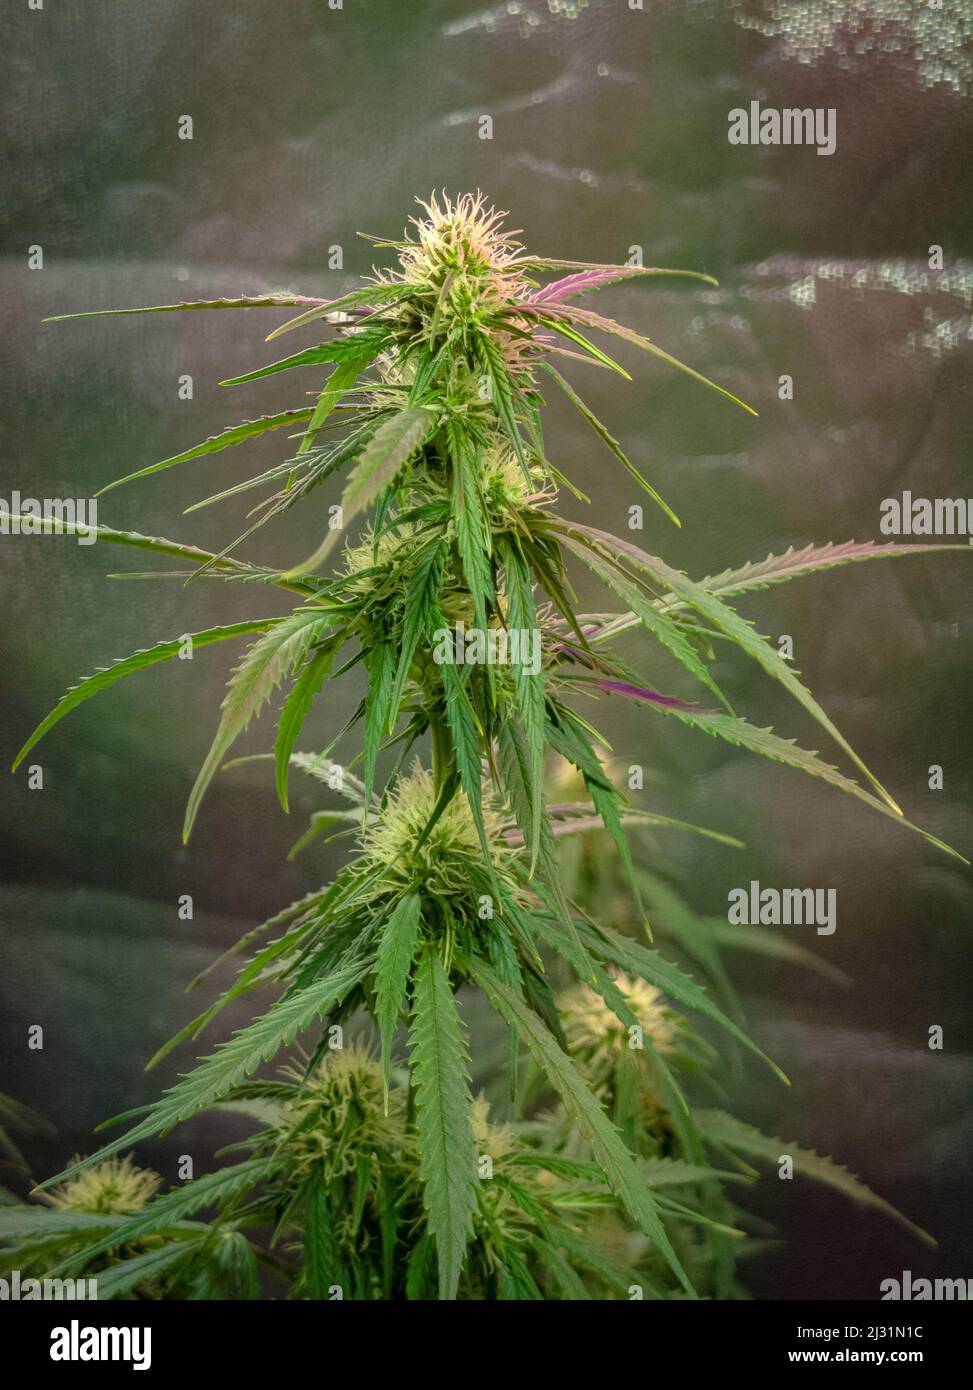 A cannabis bush with bright green leaves in a grow box Stock Photo